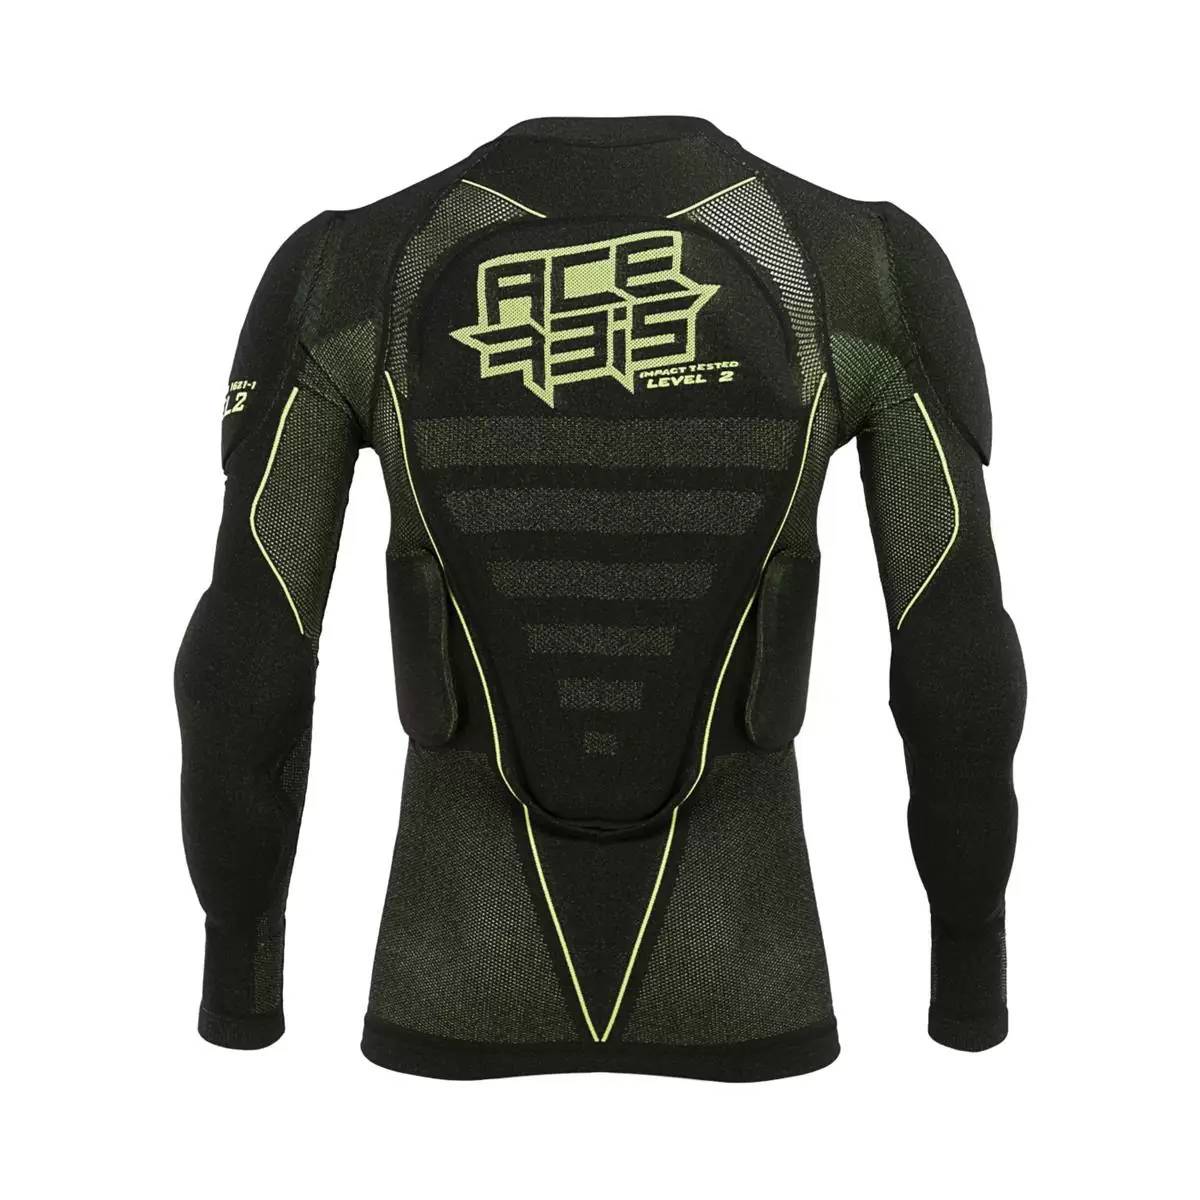 Body Armour X-Fit Future Level 2 Black/Yellow Size L/XL #2